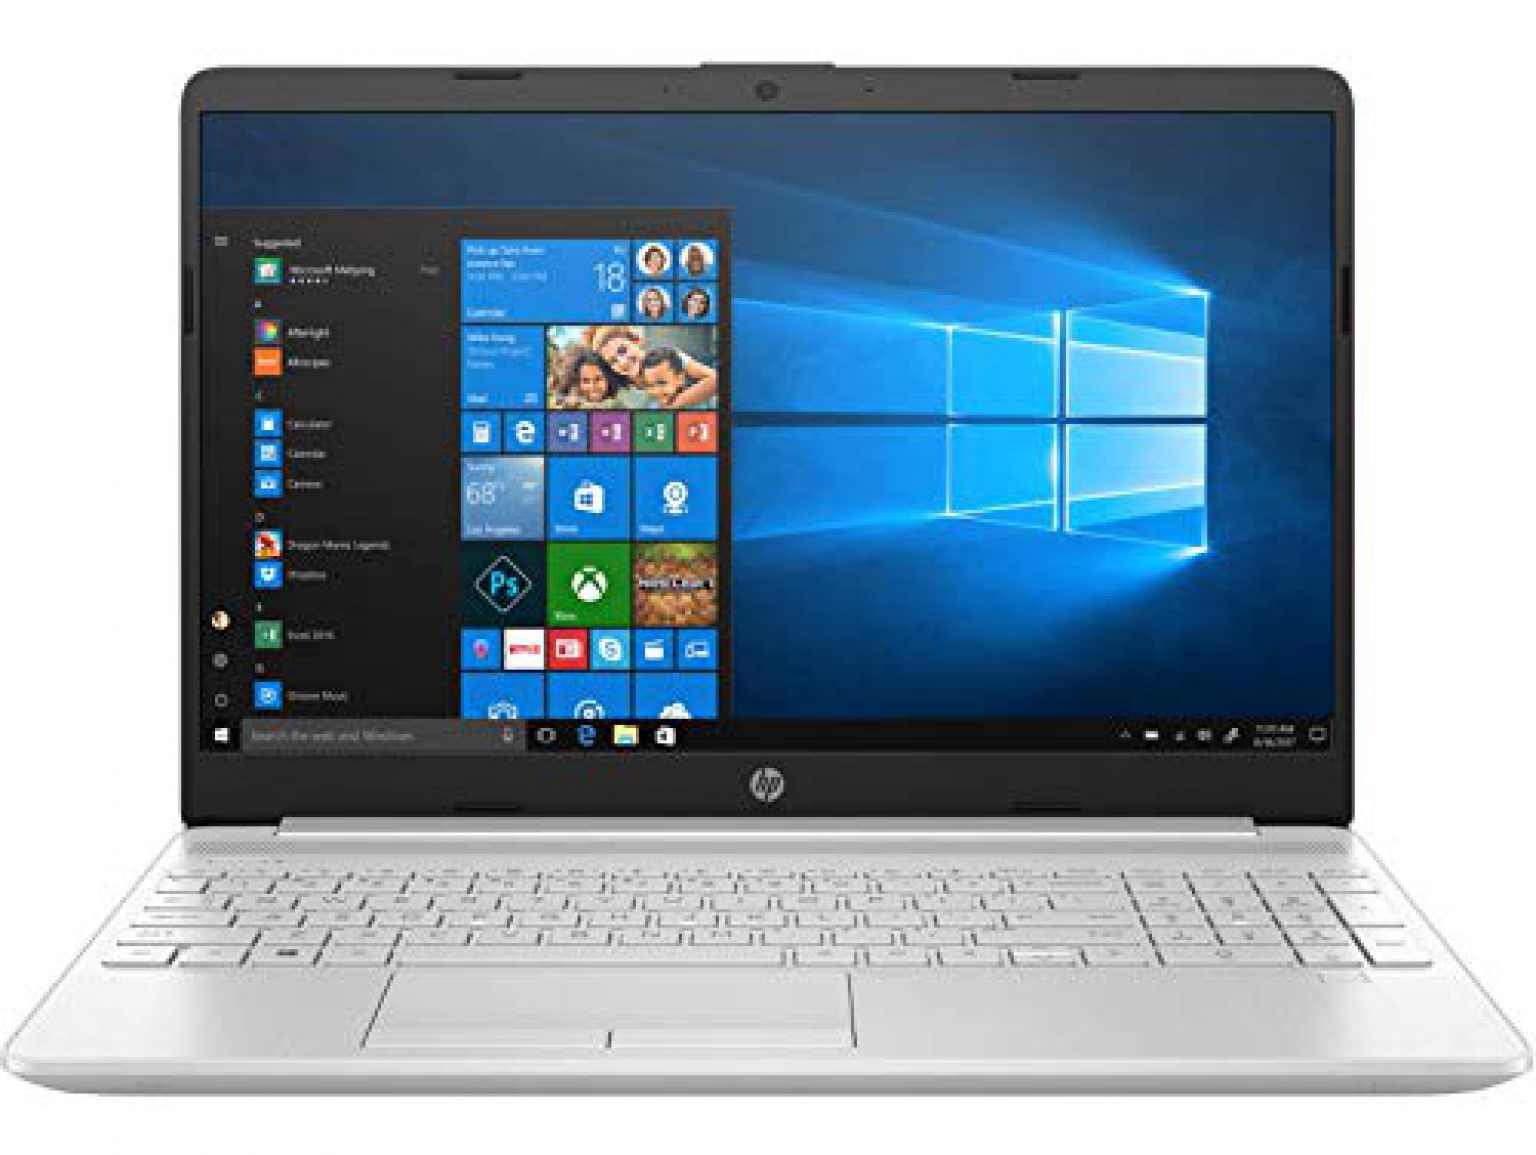 Dell Or Hp Laptop Which Is Better 2021 - dell or hp laptop which is better 2021